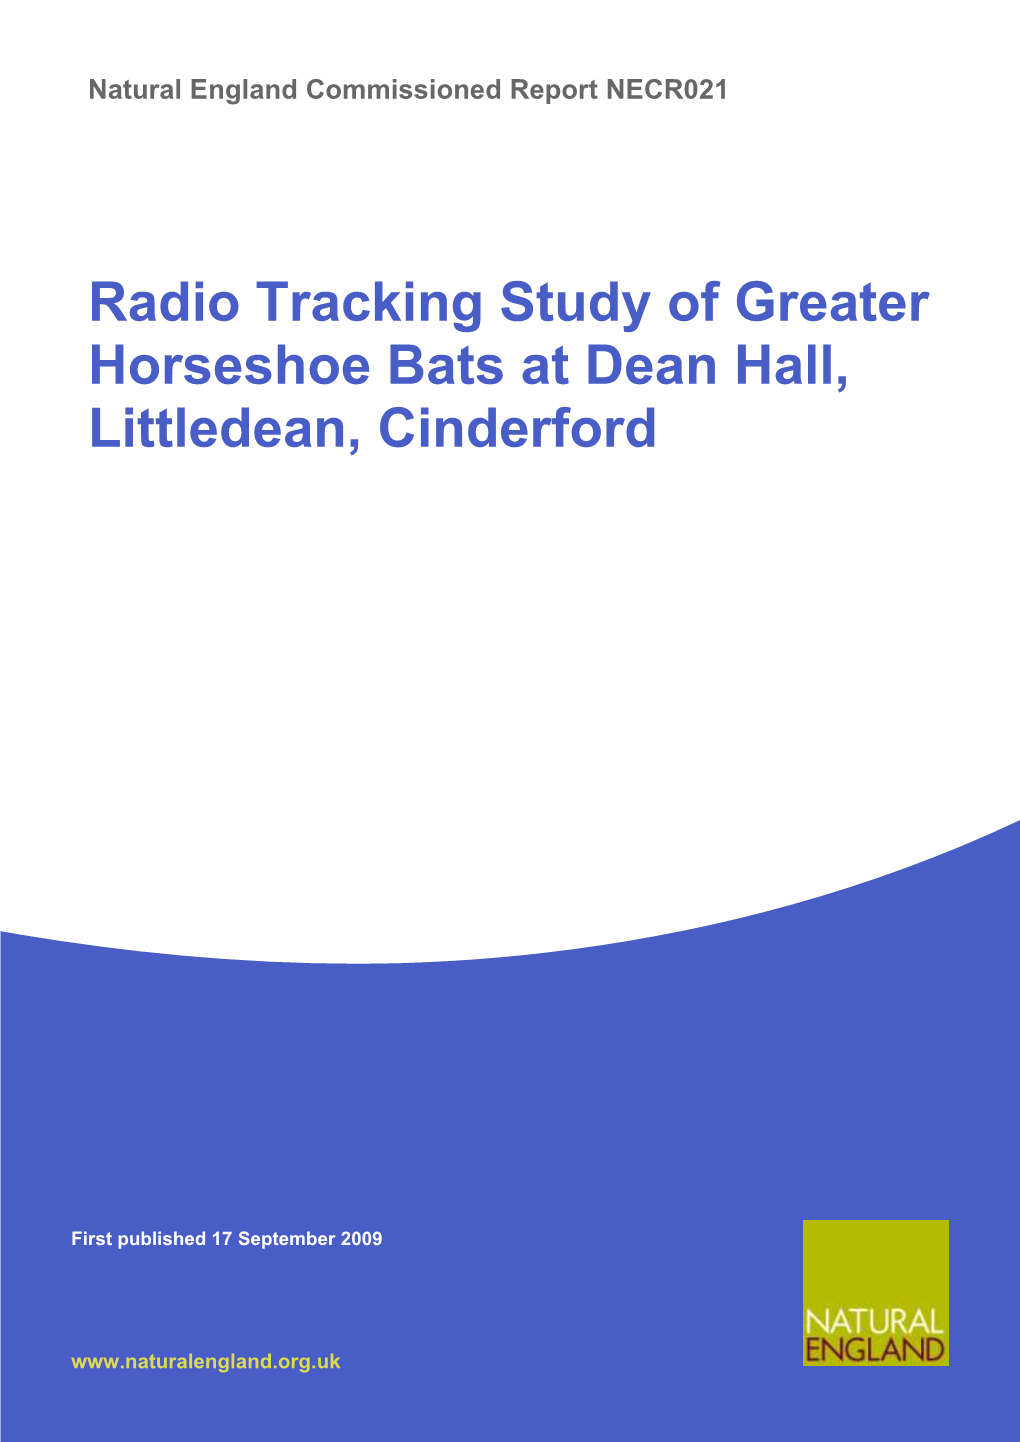 Radio Tracking Study of Greater Horseshoe Bats at Dean Hall, Littledean, Cinderford